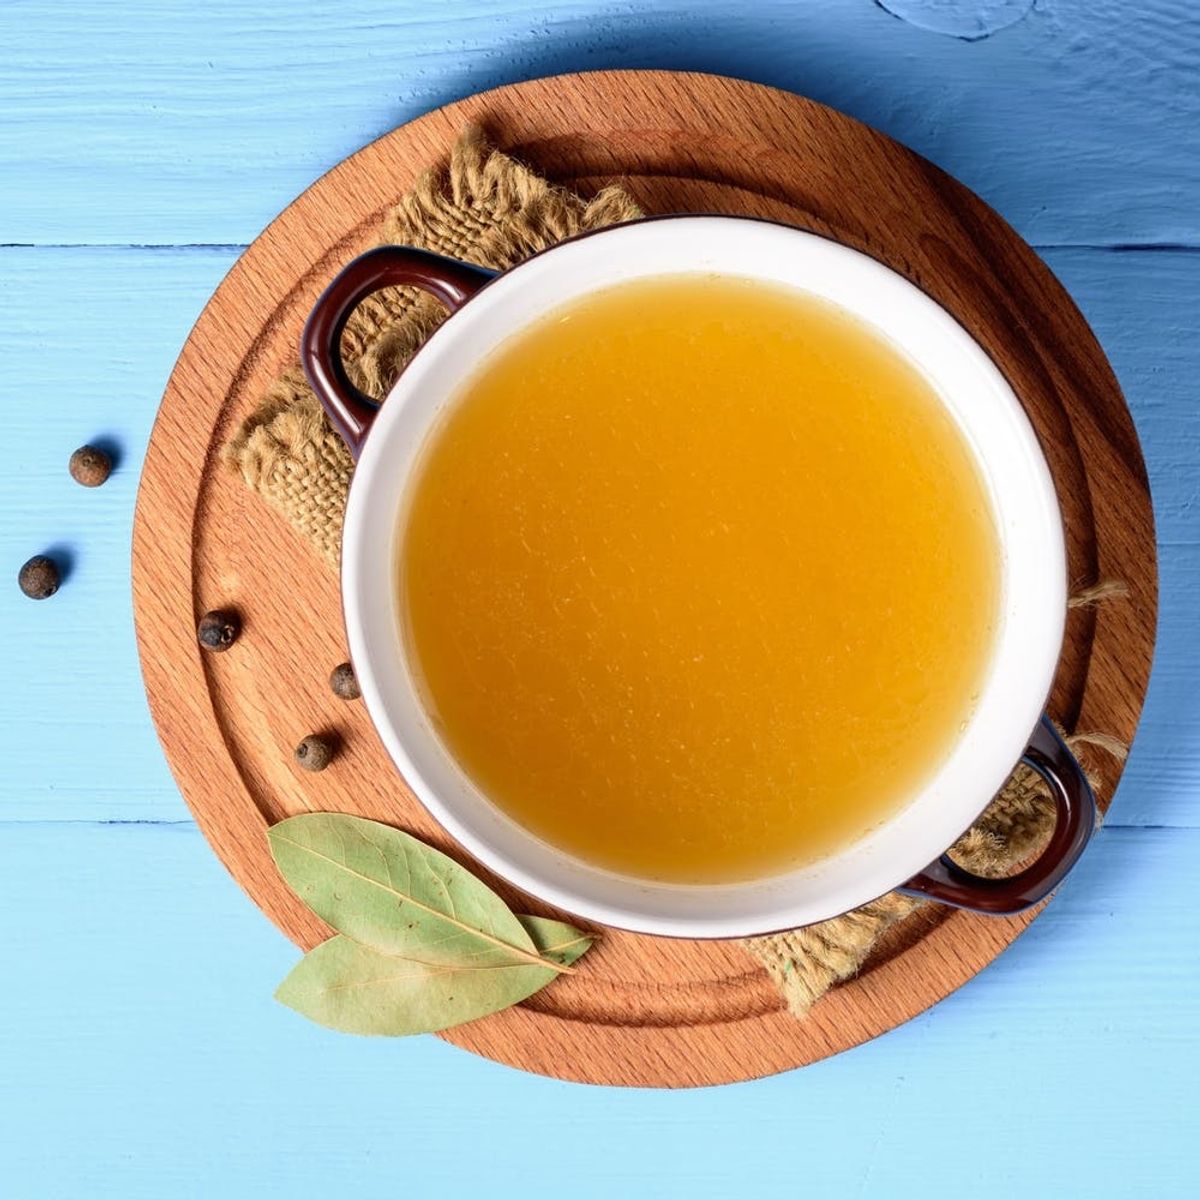 Why Everyone Can’t Stop Talking About Bone Broth